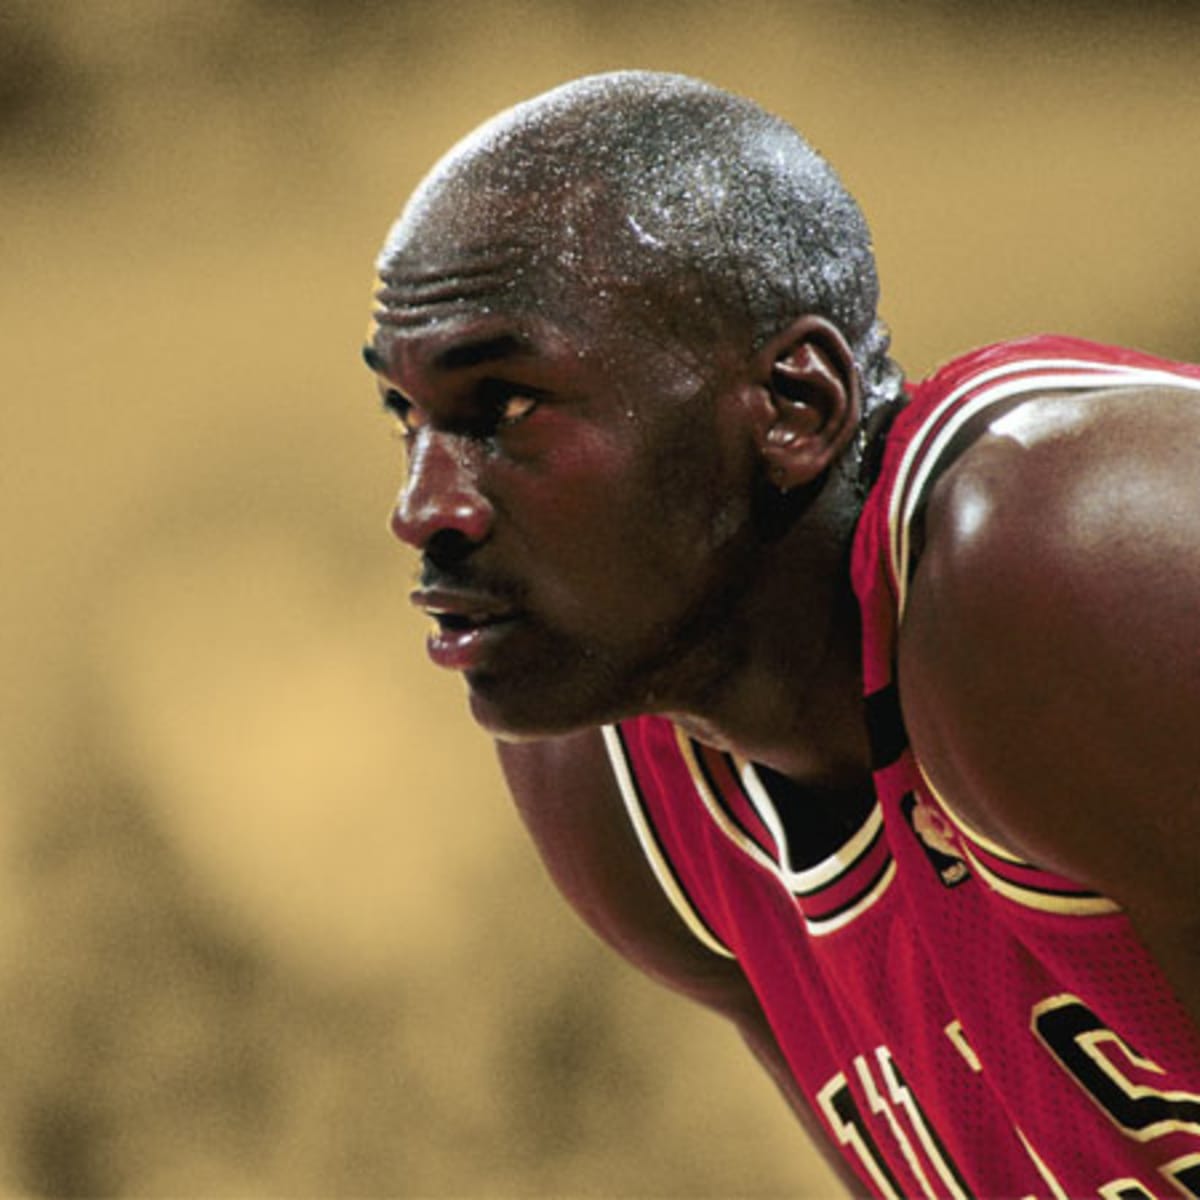 Michael Jordan Admitted the Simple Reason He Never Truly Embraced